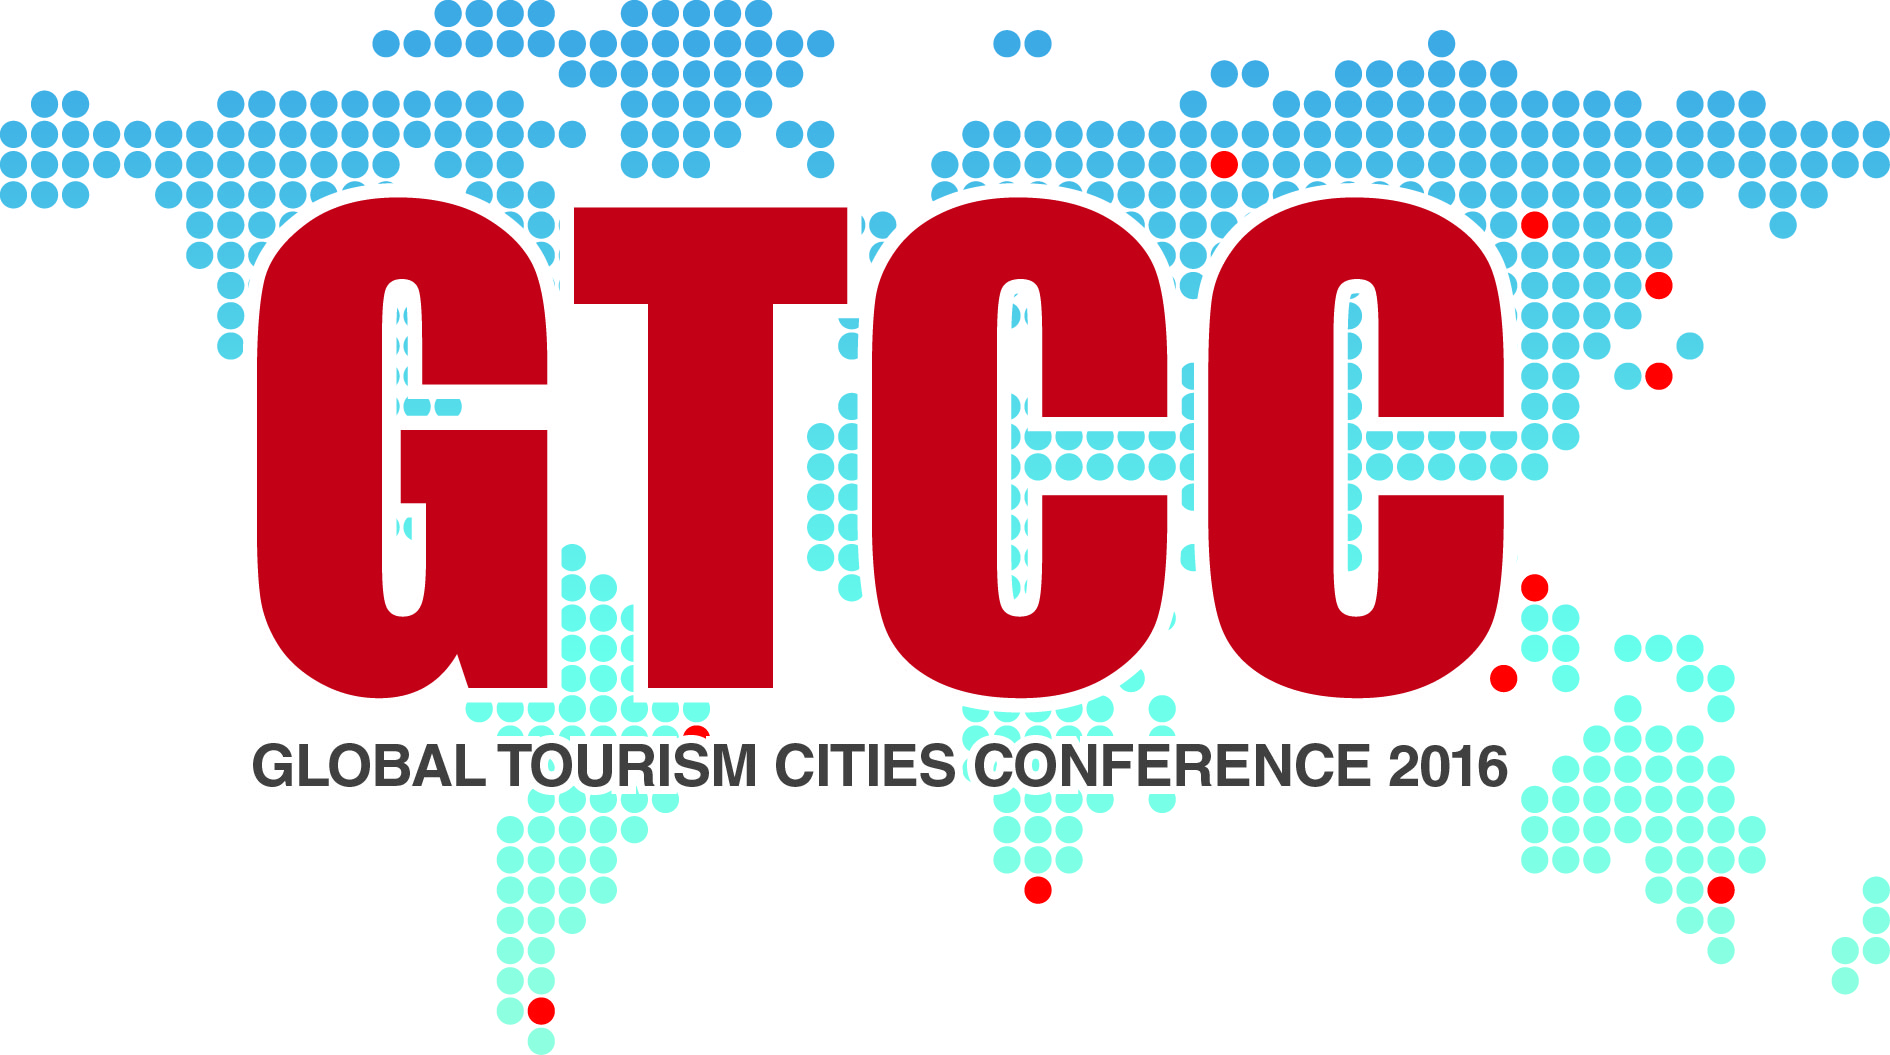 The Global Tourism Cities Conference 2016 is an international event conceptualized to provide a conduit for the pan-Asian tourism experts, policy makers and captains of industry to converge and discuss a wide spectrum of issues in the development of sustainable urban tourism, share success stories and frameworks from the region.
Website: http://www.globaltourismcitiesconference.com 
